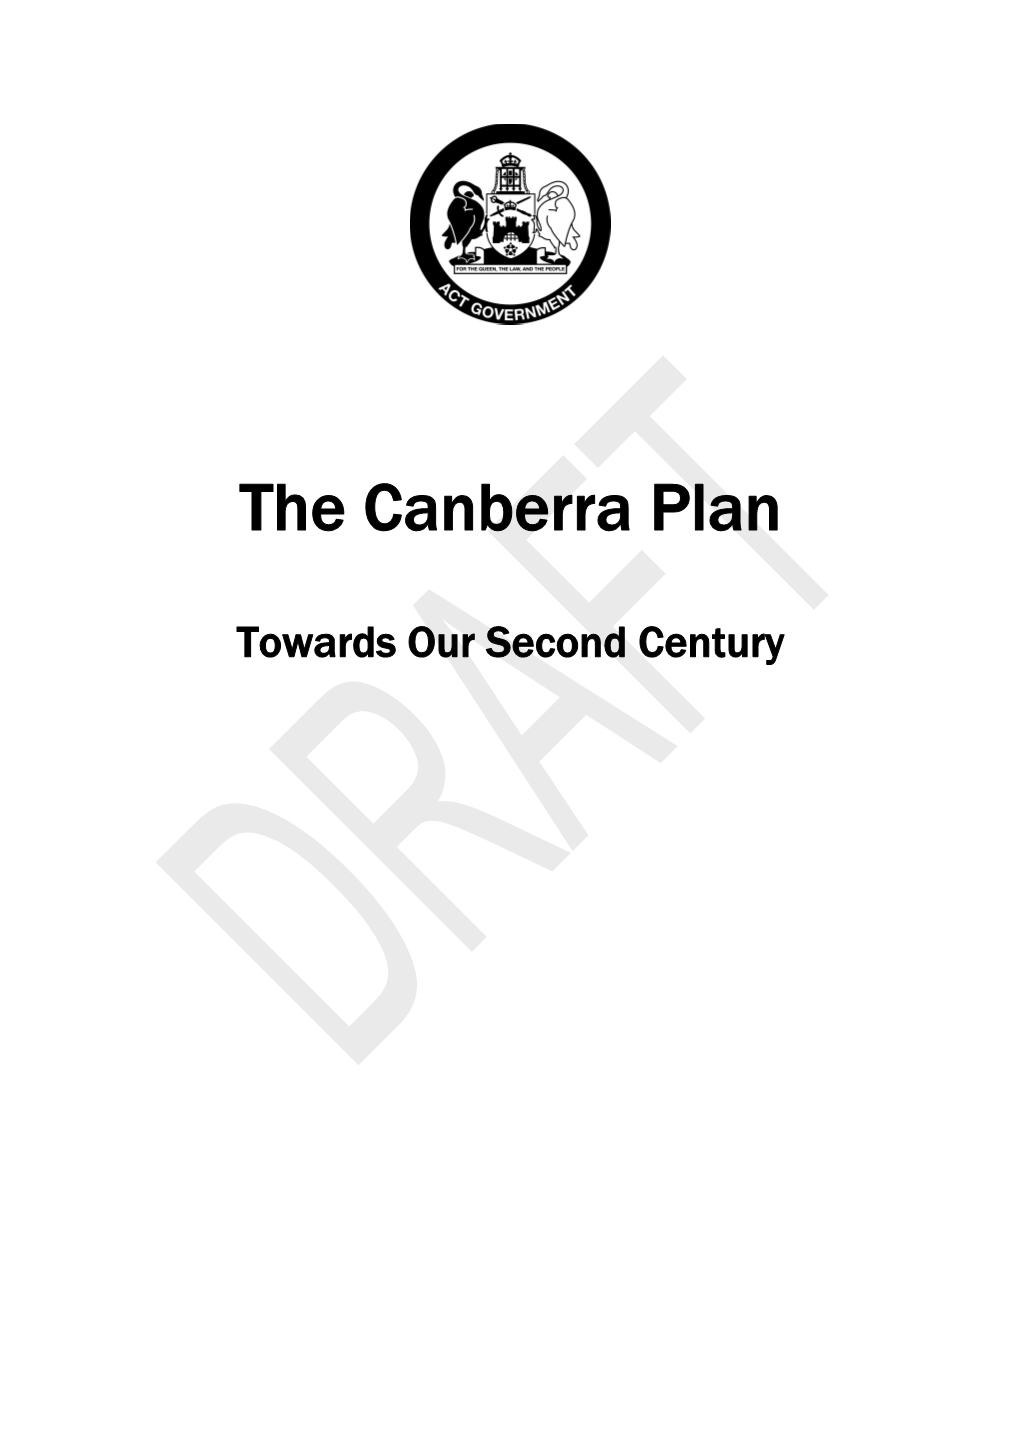 The Canberra Plan 2008